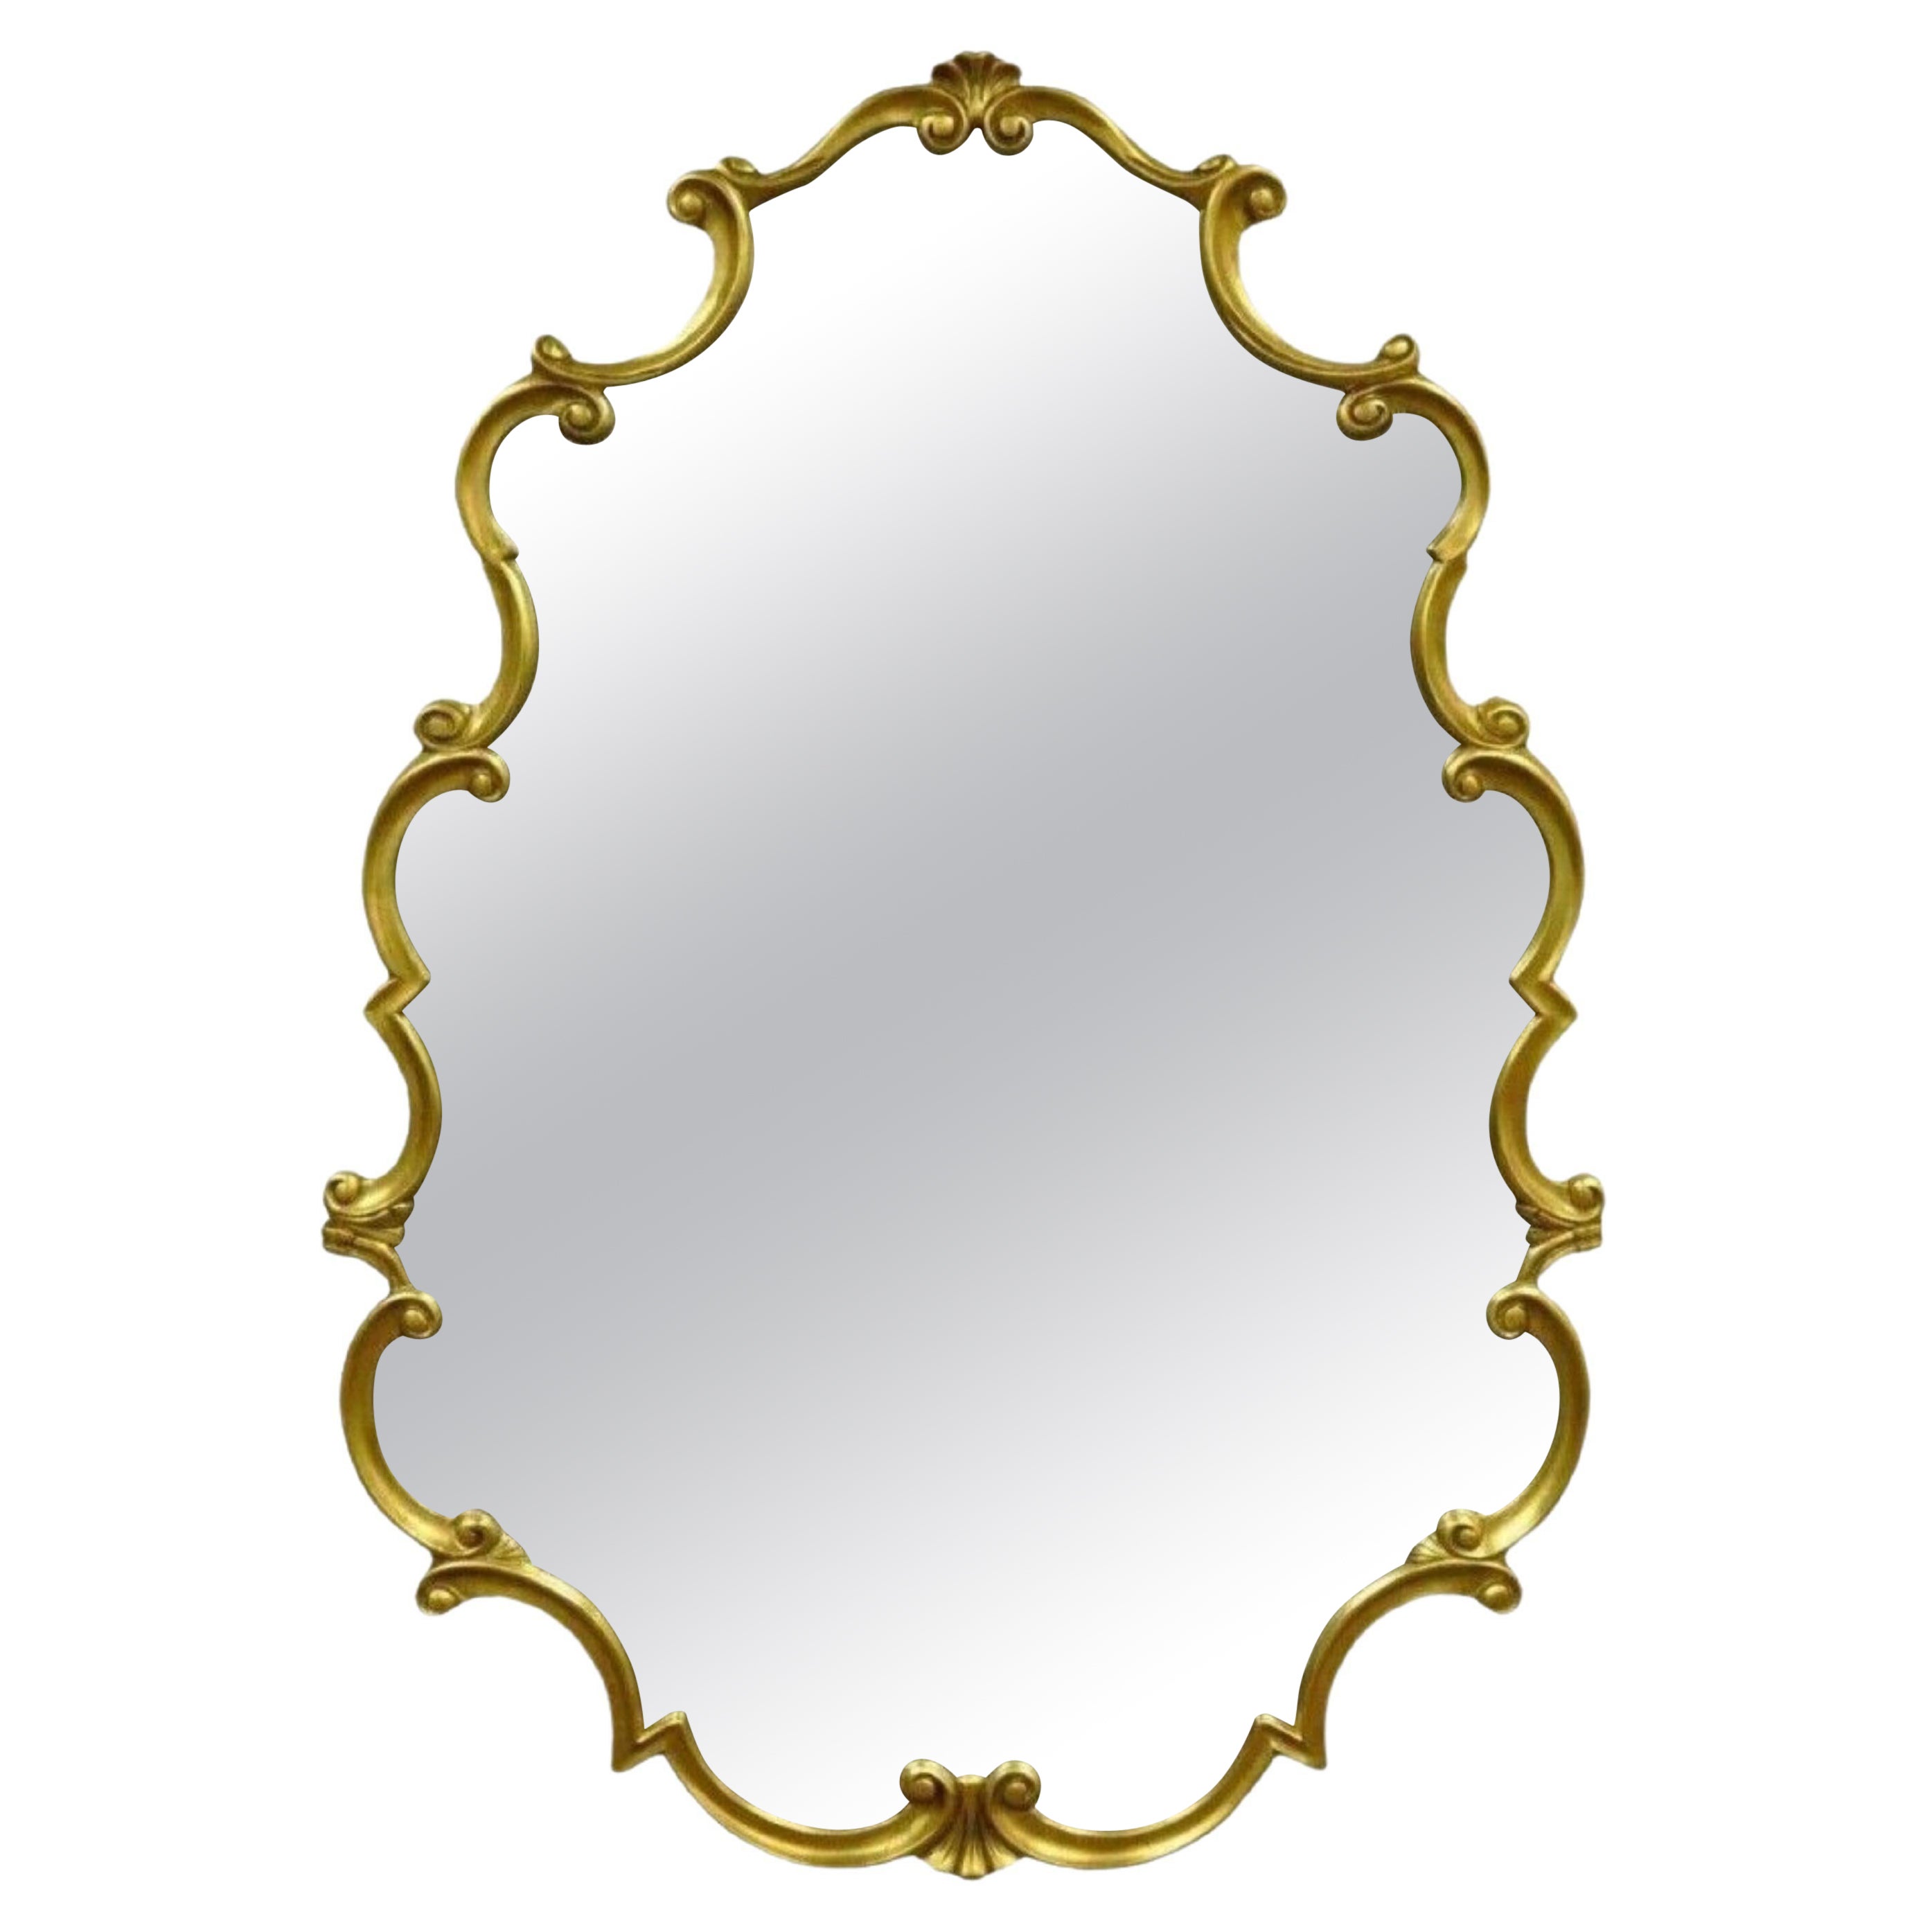 Vintage Hollywood Regency French Style Gold Carved Wood Scrollwork Wall Mirror For Sale